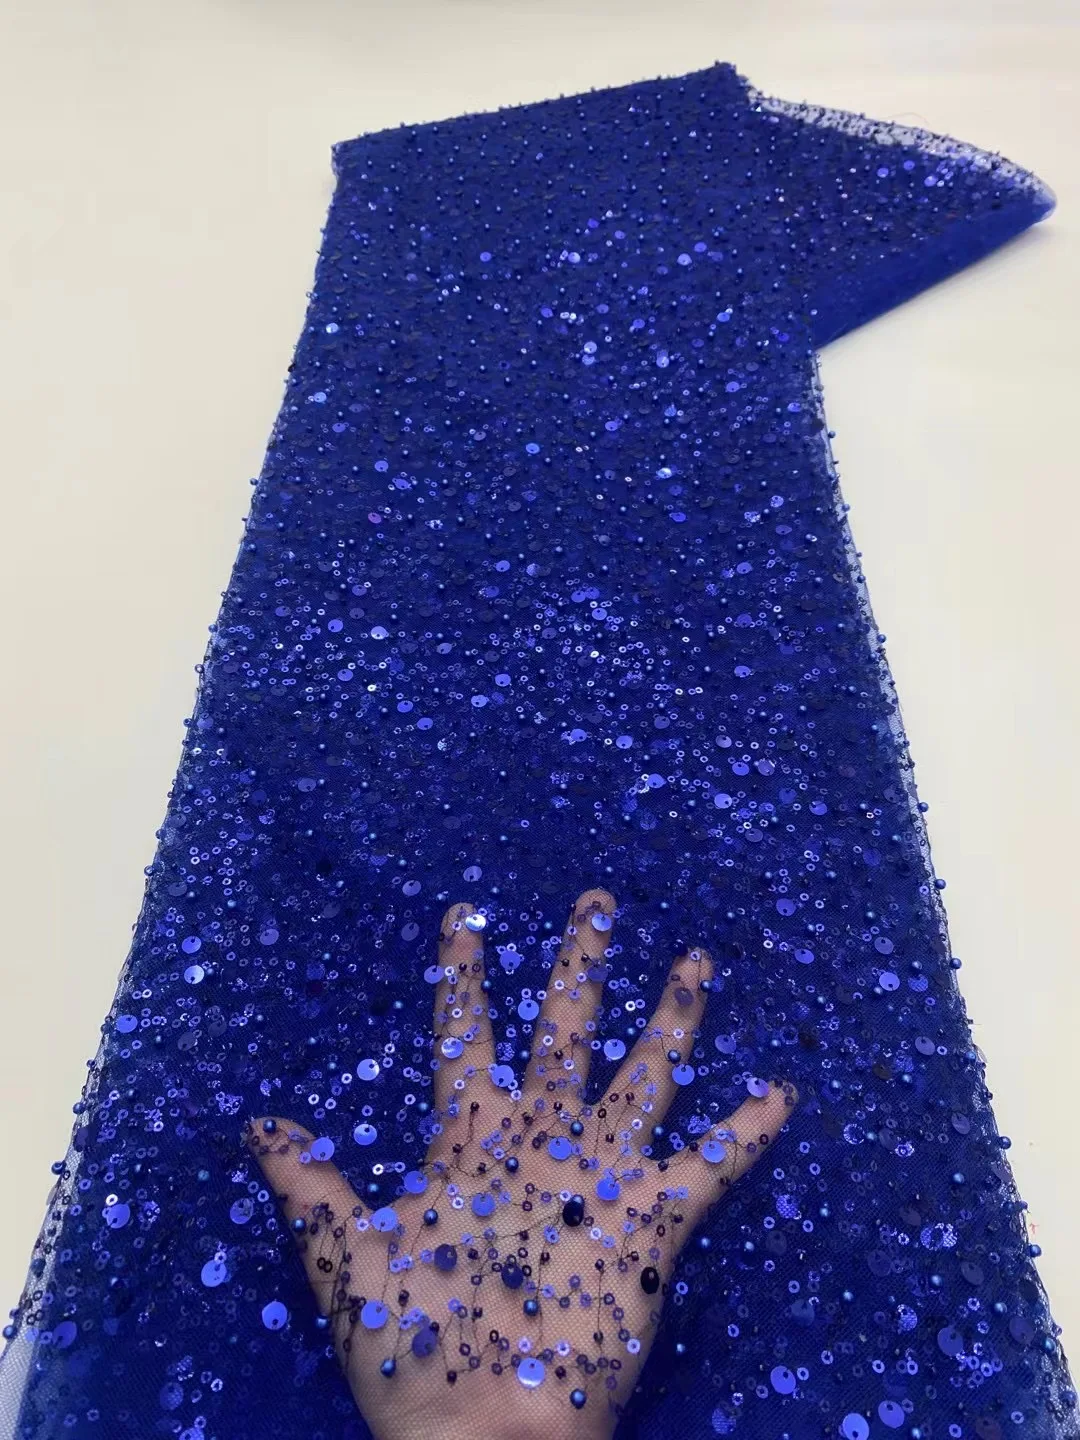 African Royal Blue Shiny Sequins Lace Fabric French High Quality Beaded Tulle Fabric Elegant Traditional For Wedding Dress Sew